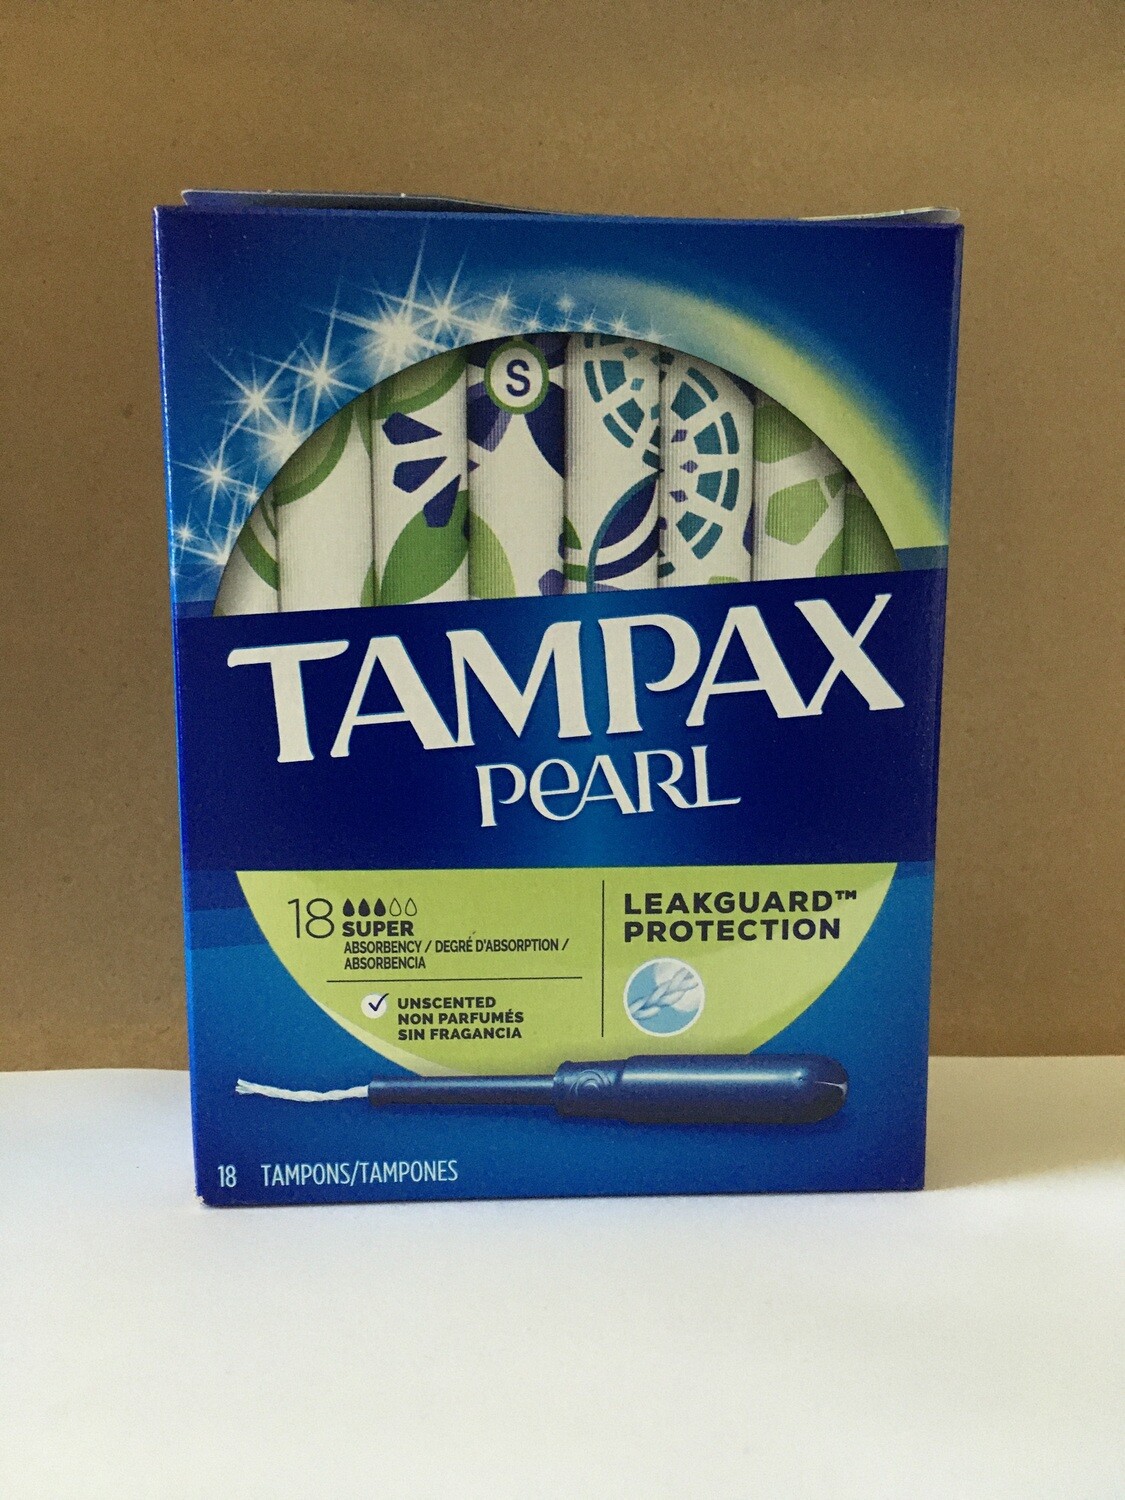 Health and Beauty / Feminine Products / Tampax Pearl Super